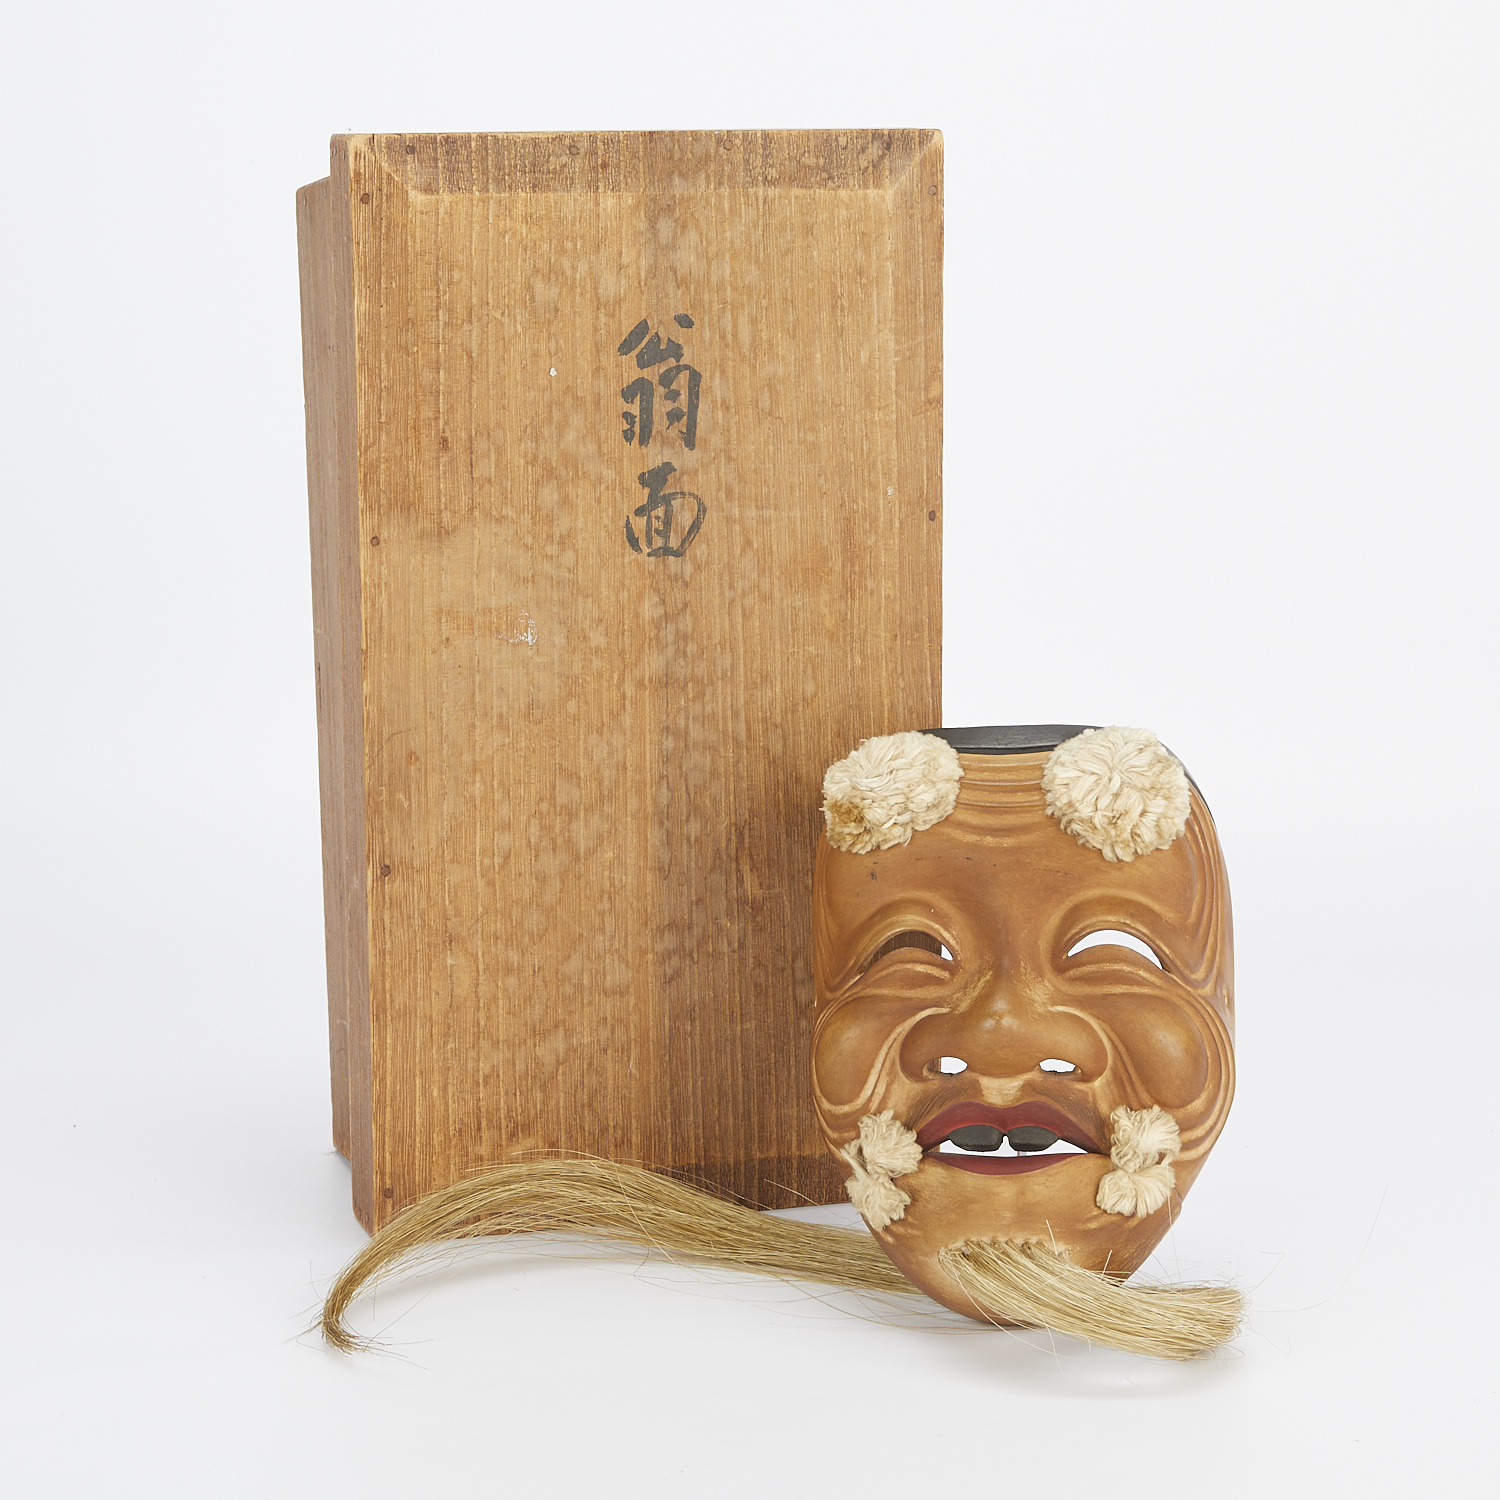 Kano Tessai Carved Wood Noh Mask - Image 2 of 15